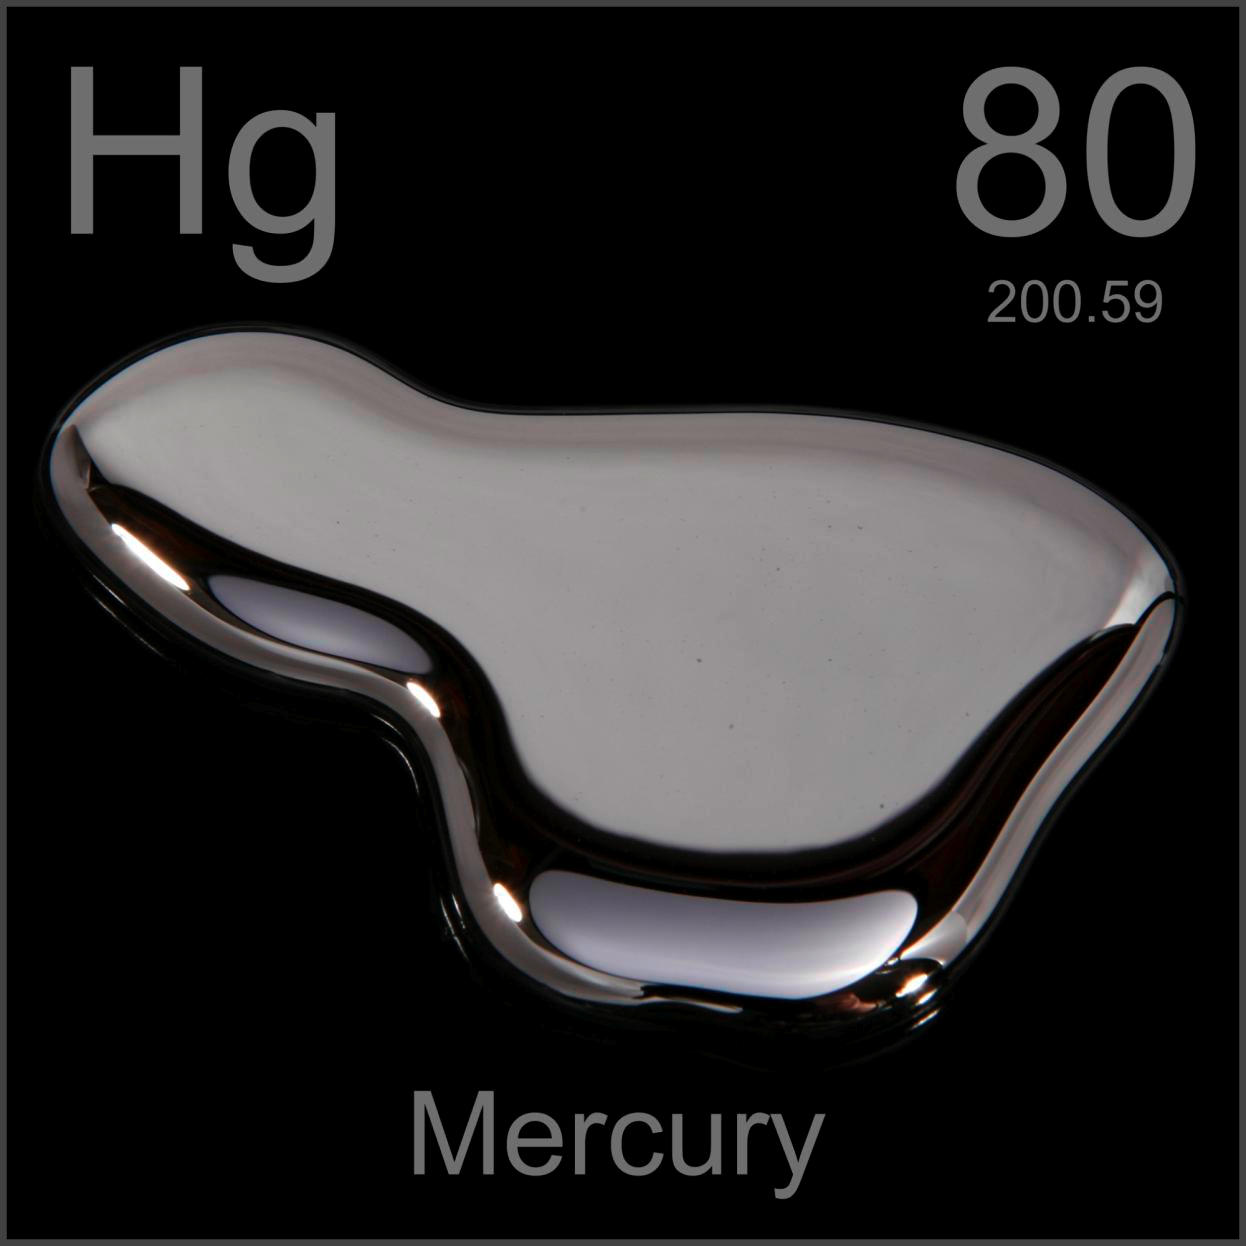 The importance of Bromine in reducing Mercury emissions